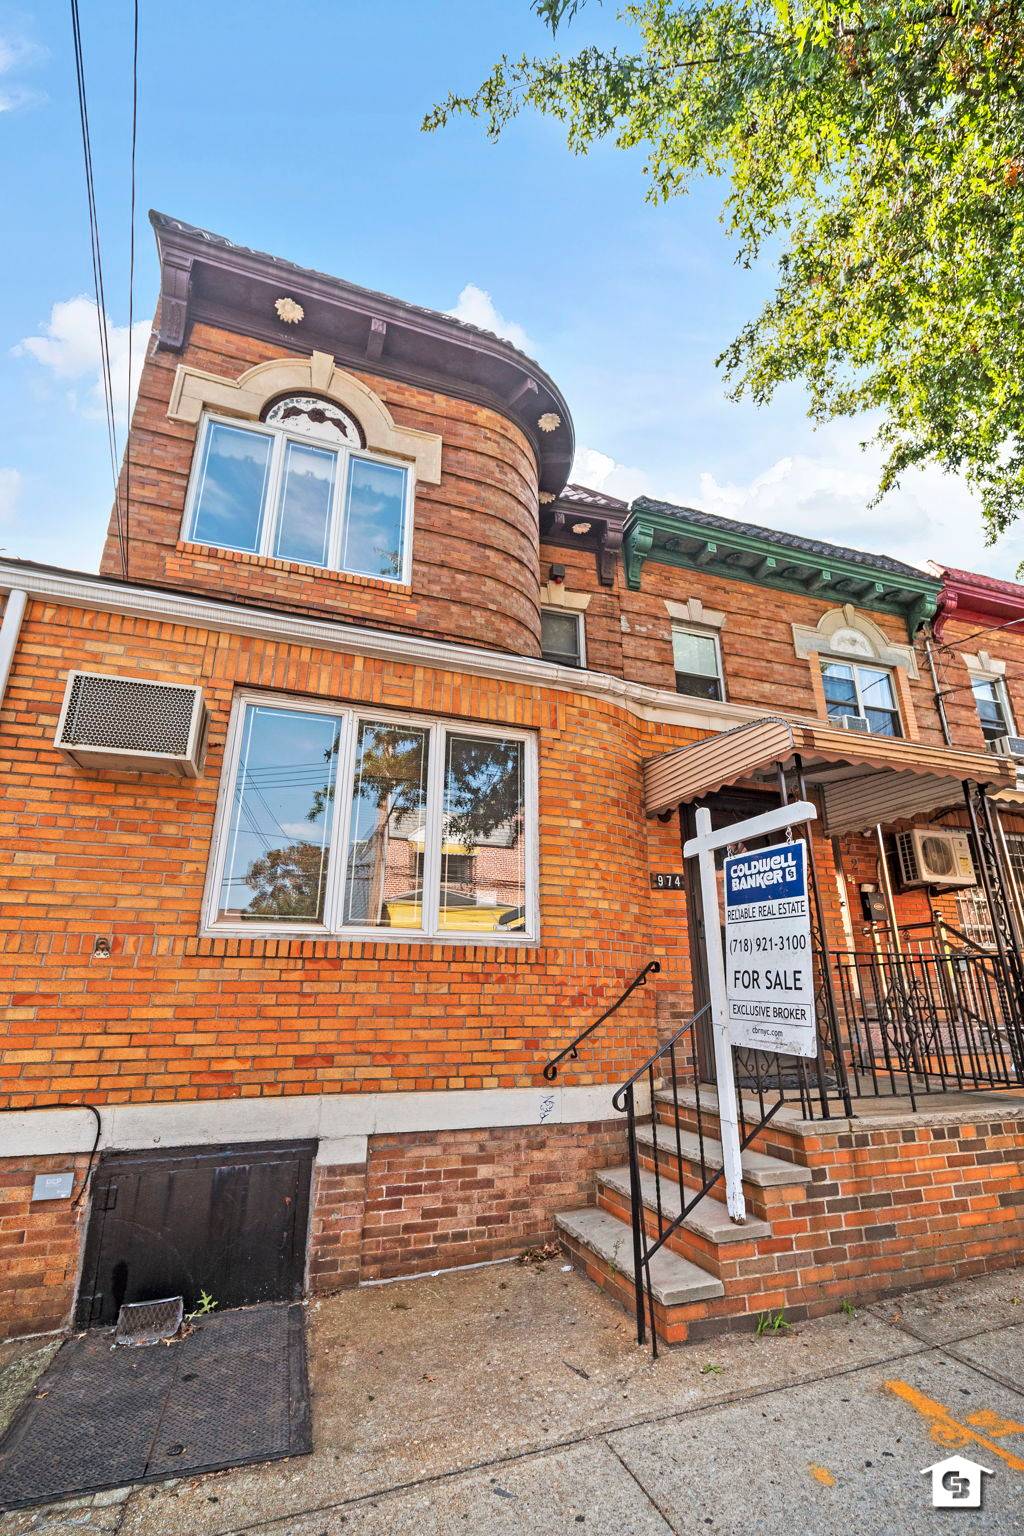 Make this former doctor's office plus legal residential unit your own.